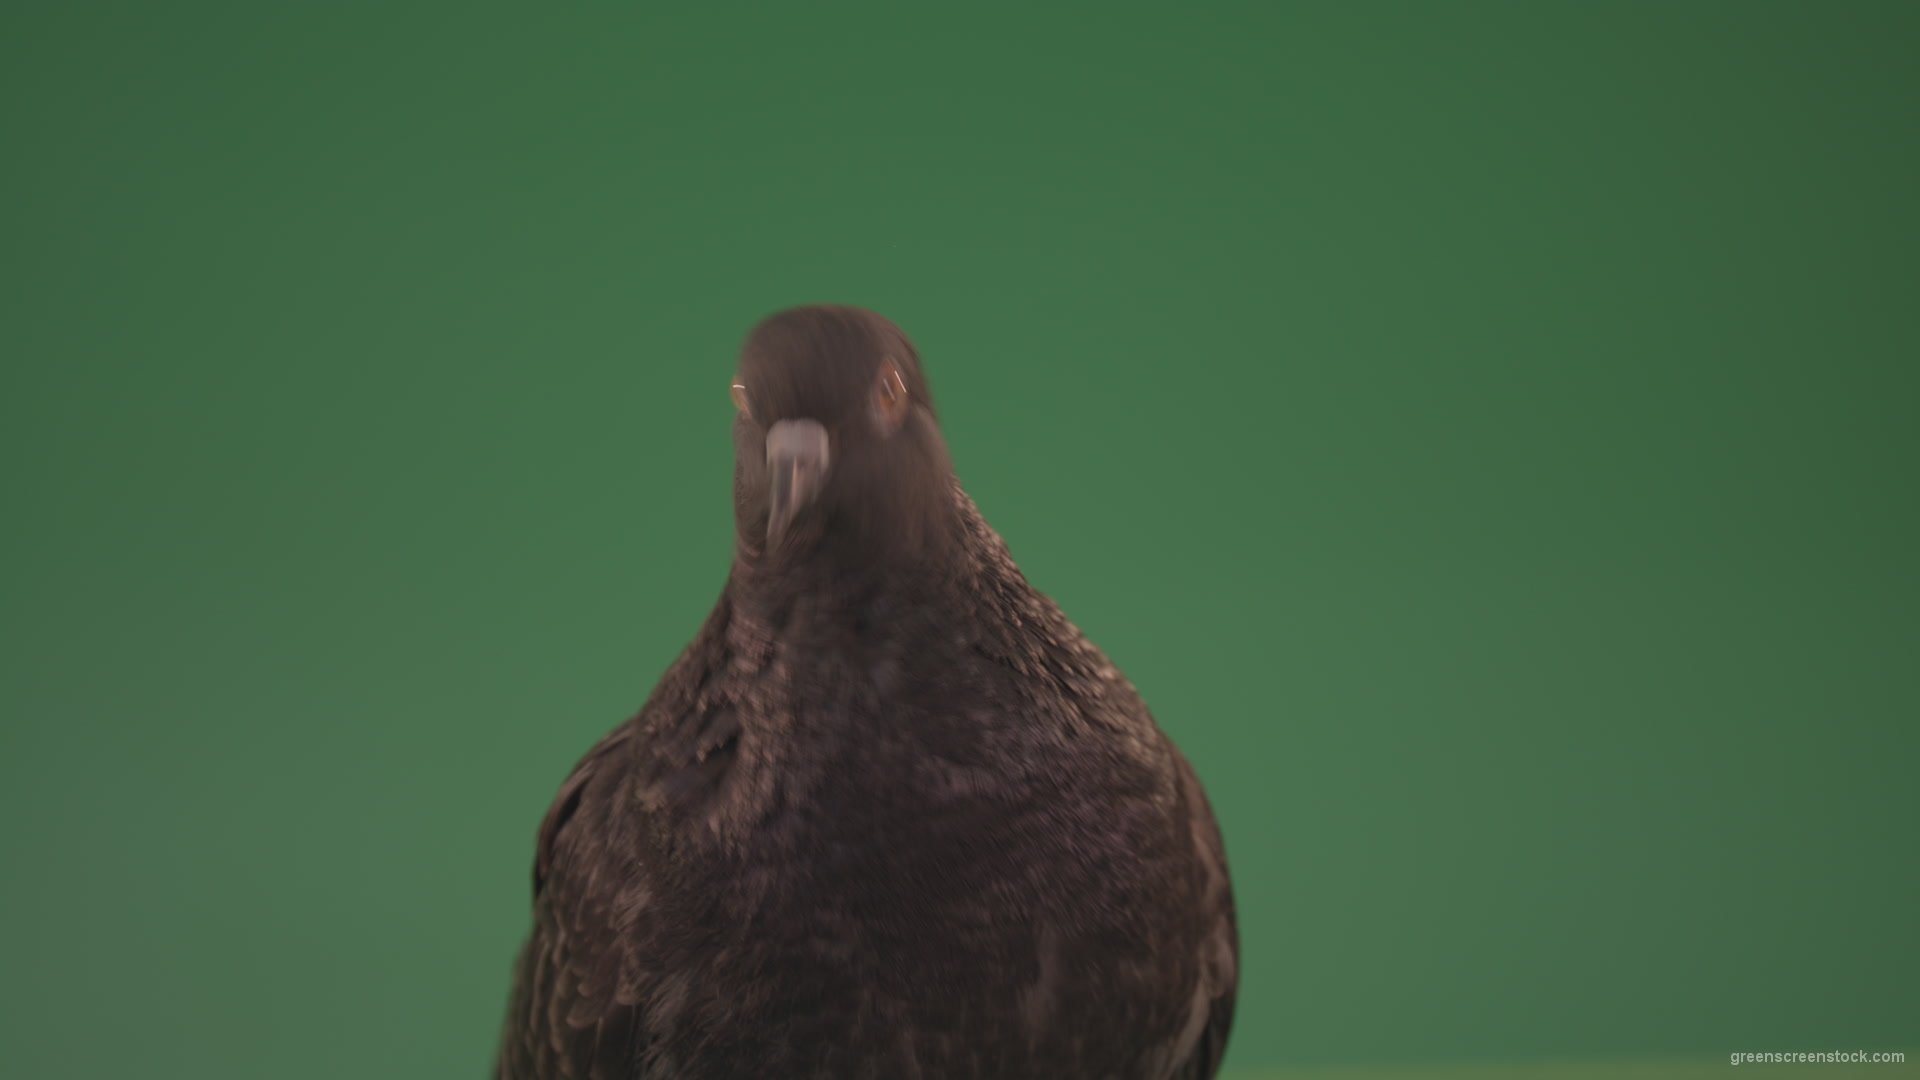 Dove-looks-at-the-city-from-the-height-of-the-birds-eye-isolated-on-chromakey-background_005 Green Screen Stock